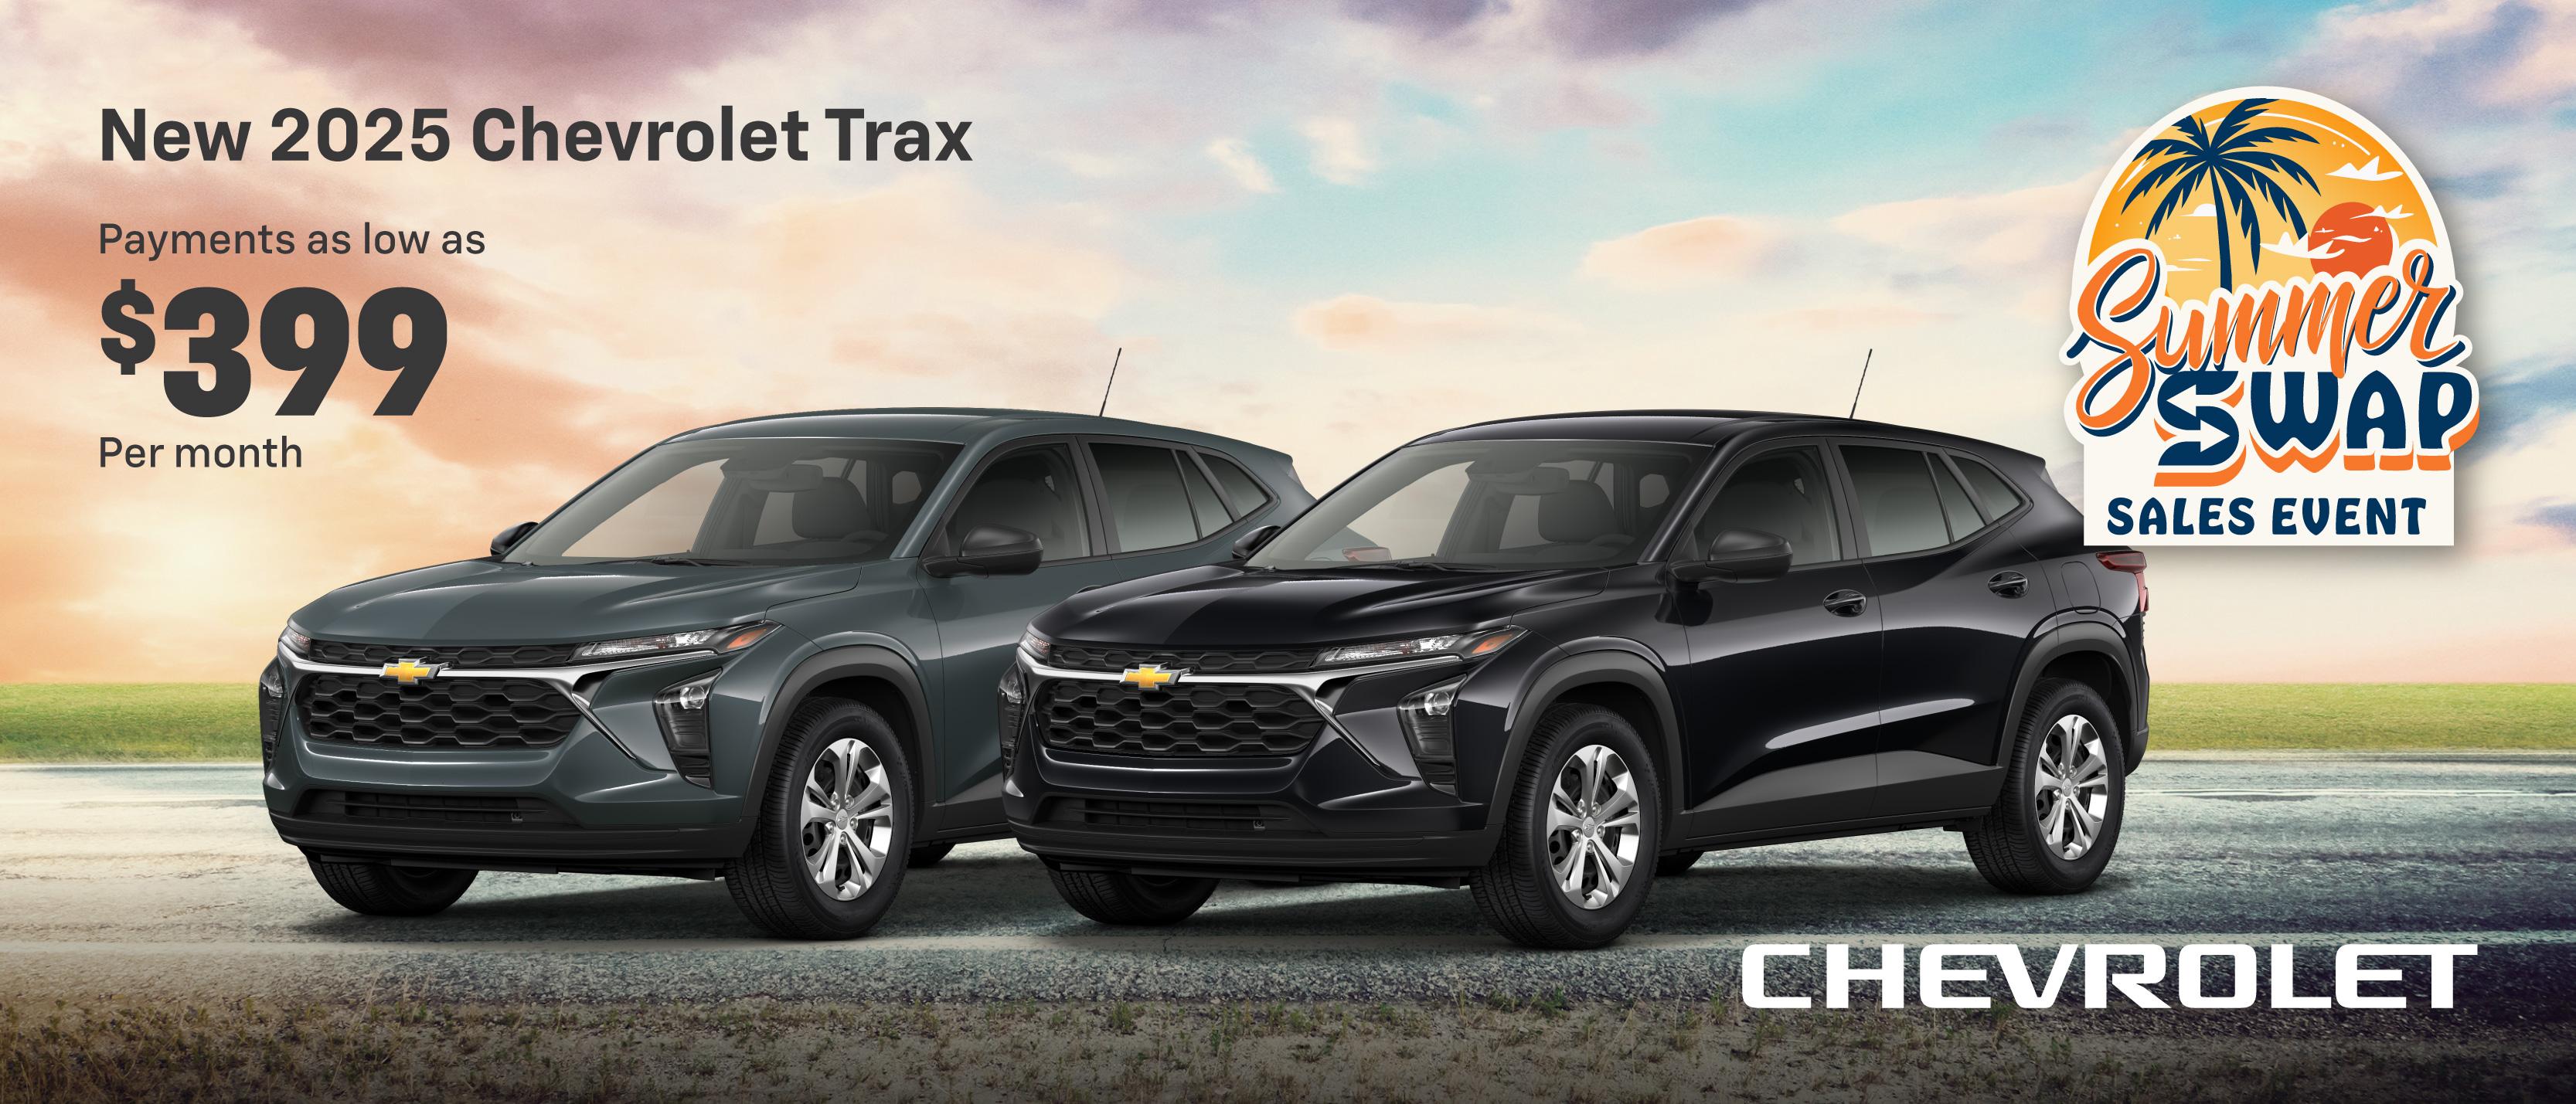 Shop $399 Per Month Chevy Trax Hot Offer!🔥